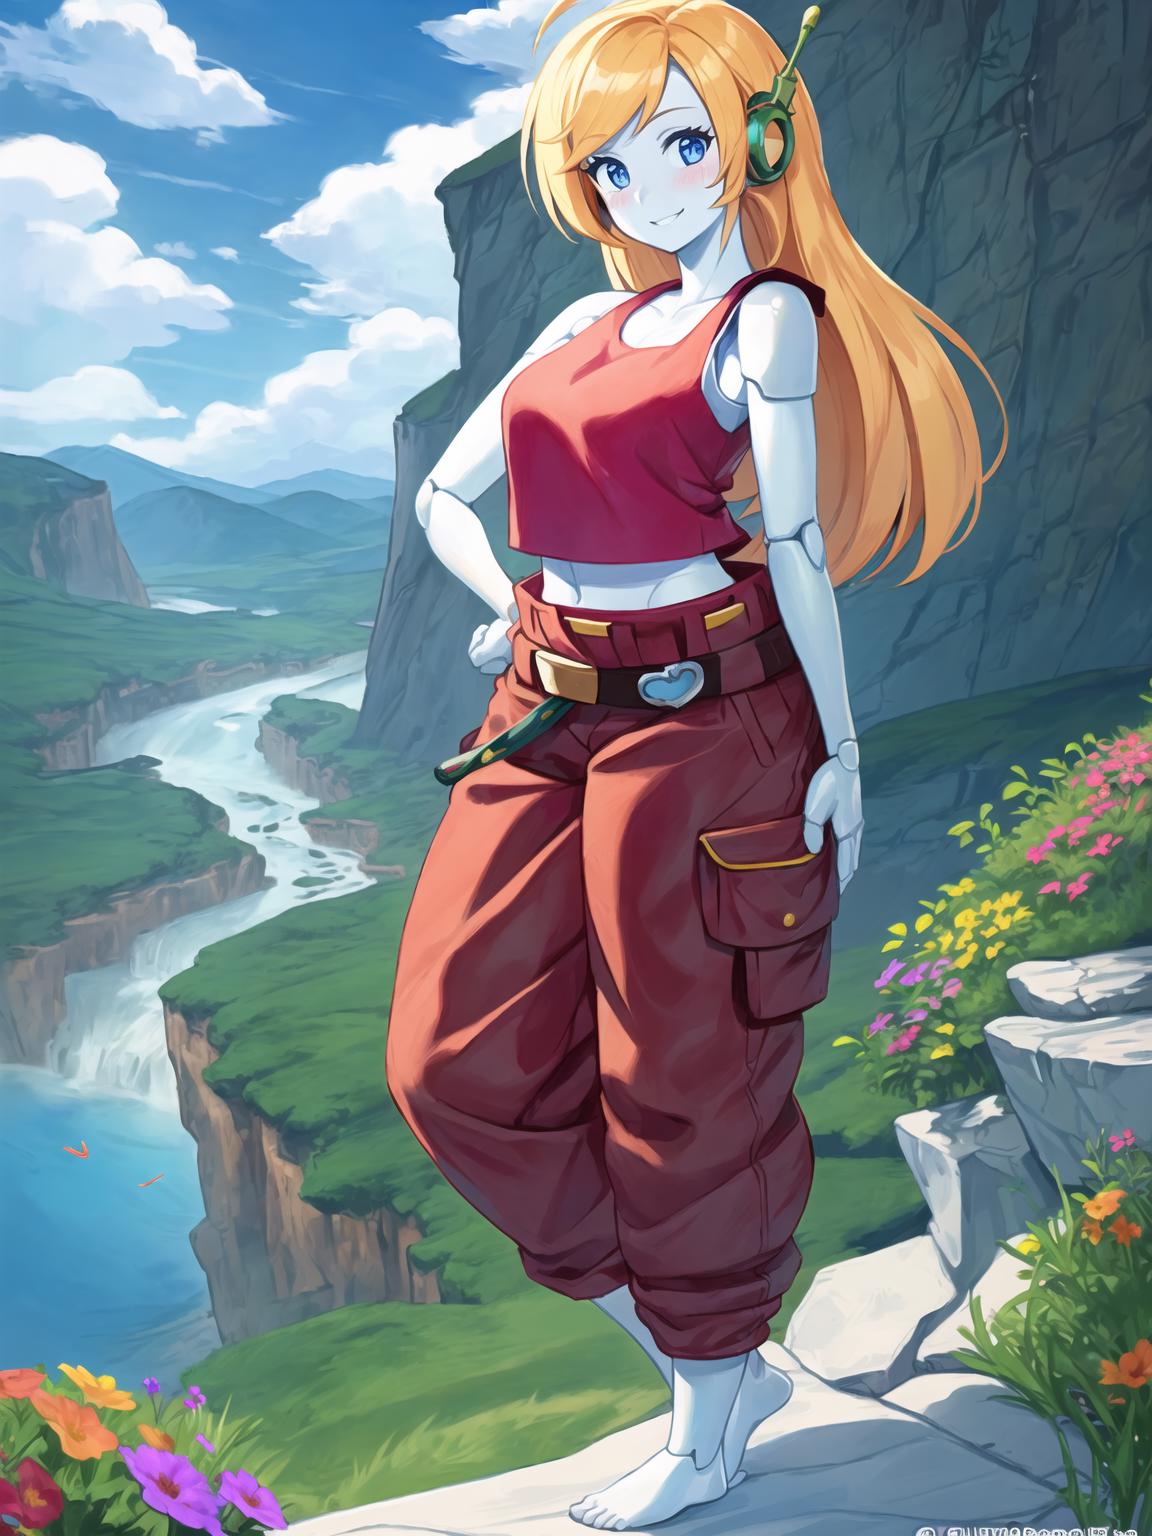 Curly Brace (Cave Story) image by NoBotherPls